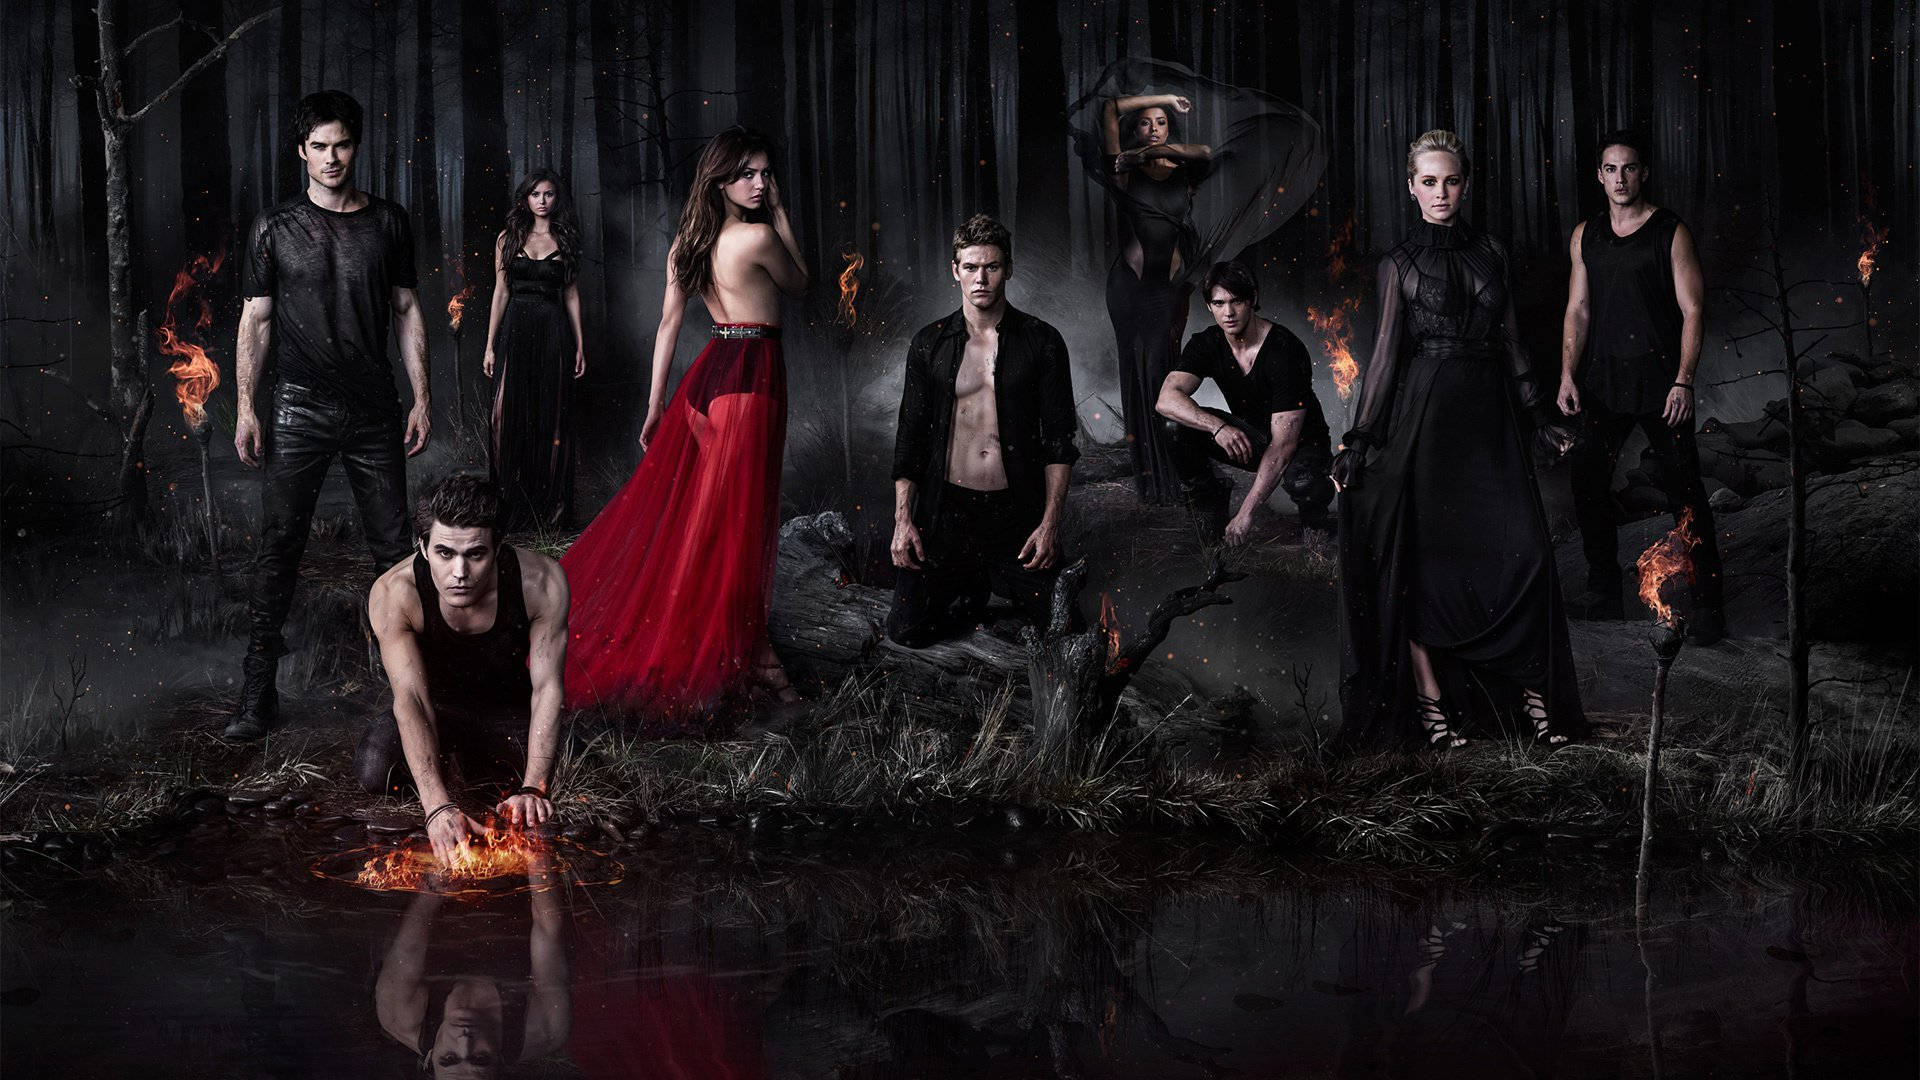 The Vampire Diaries Characters In Dark Forest Wallpaper